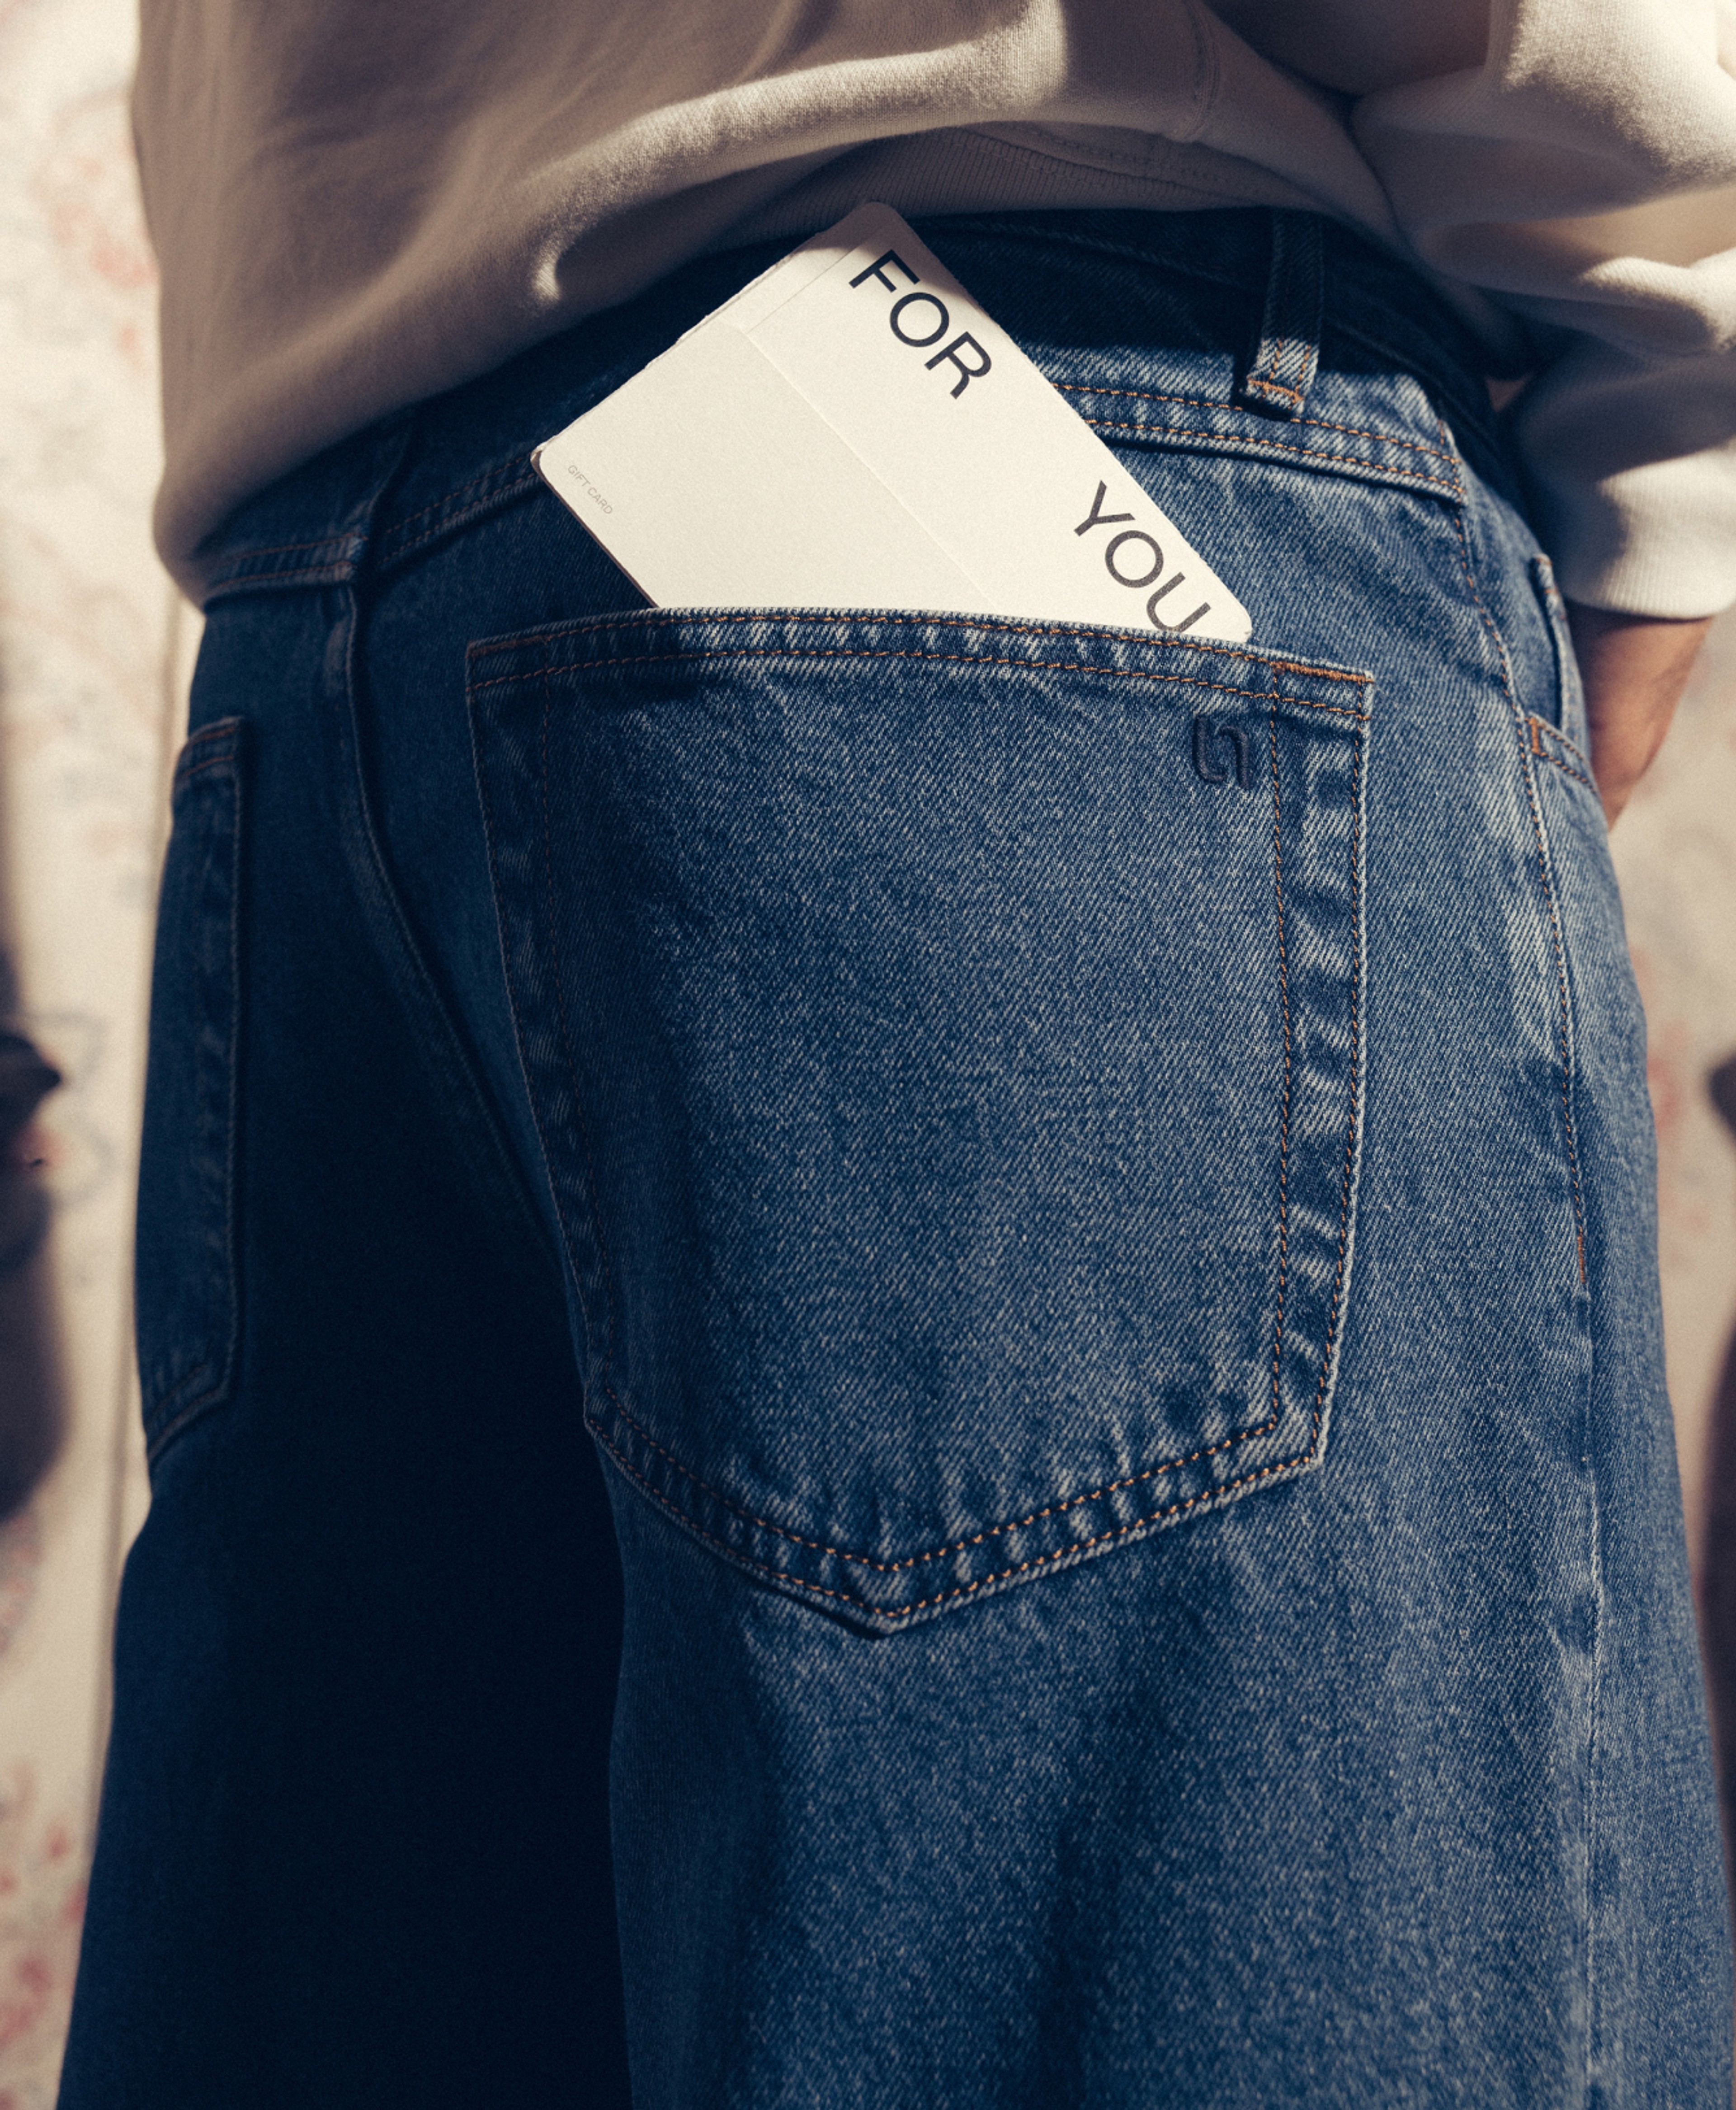 unspun jeans with card reading "for you" in back pocket